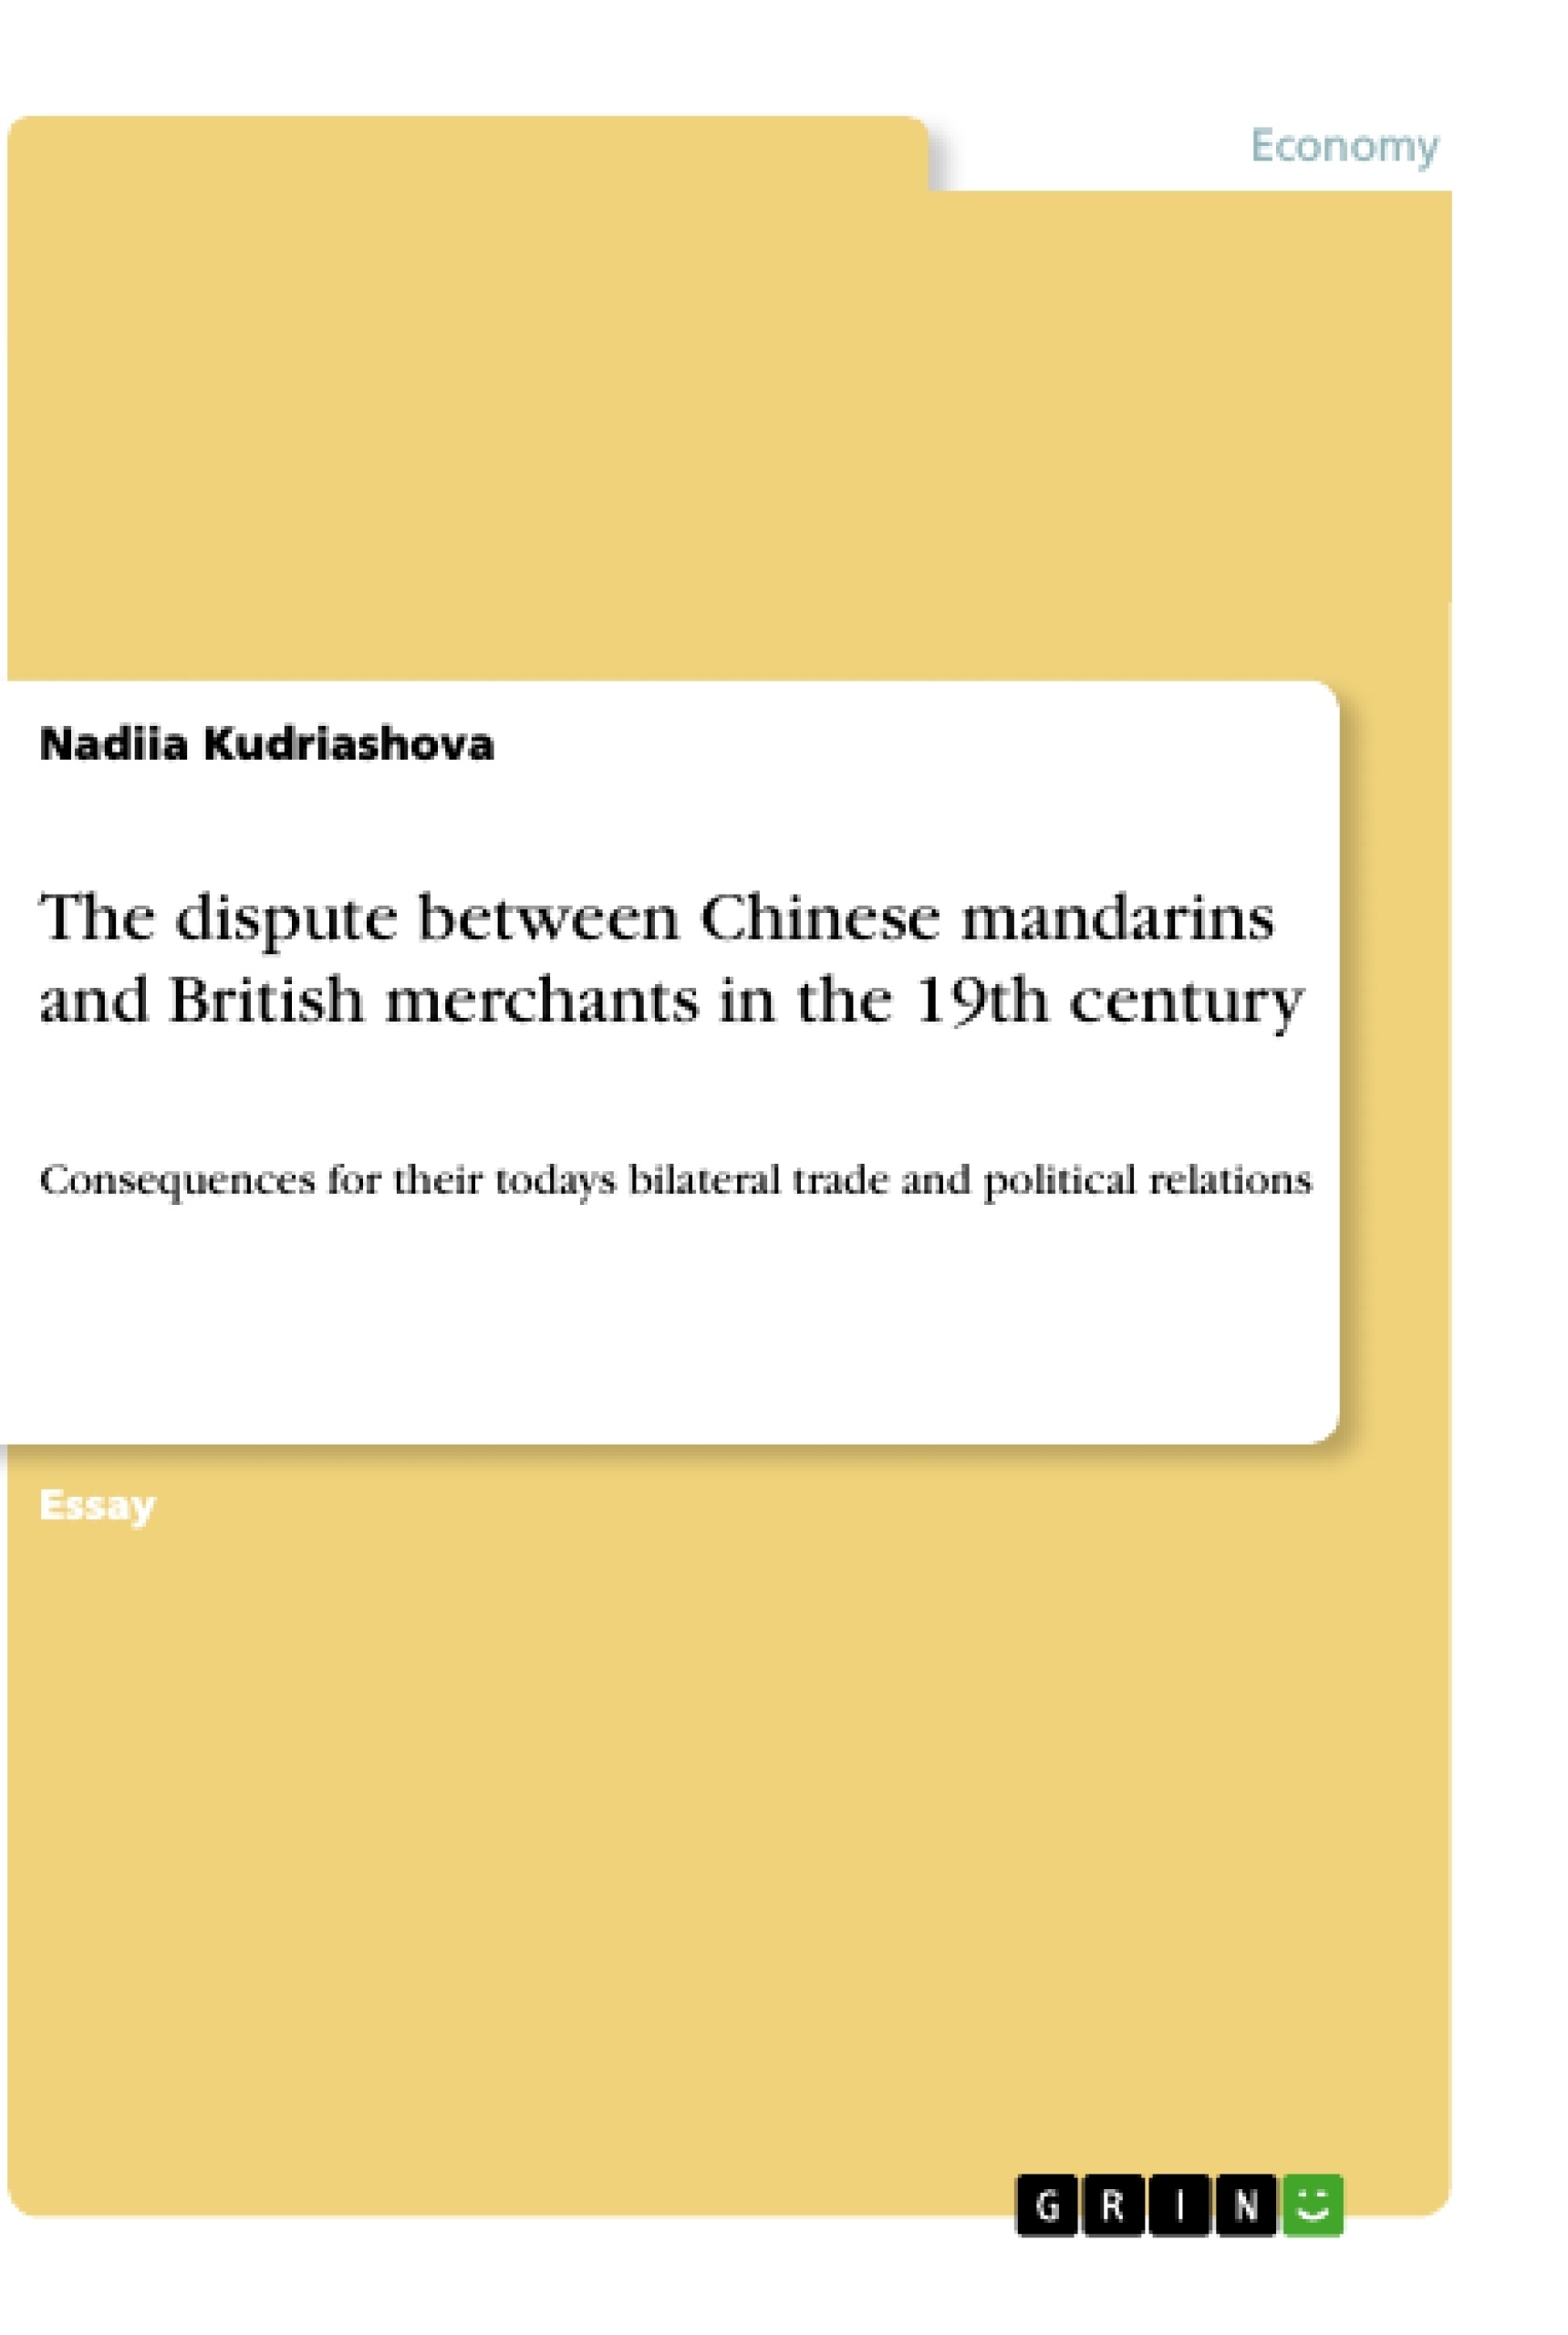 Titel: The dispute between Chinese mandarins and British merchants in the 19th century